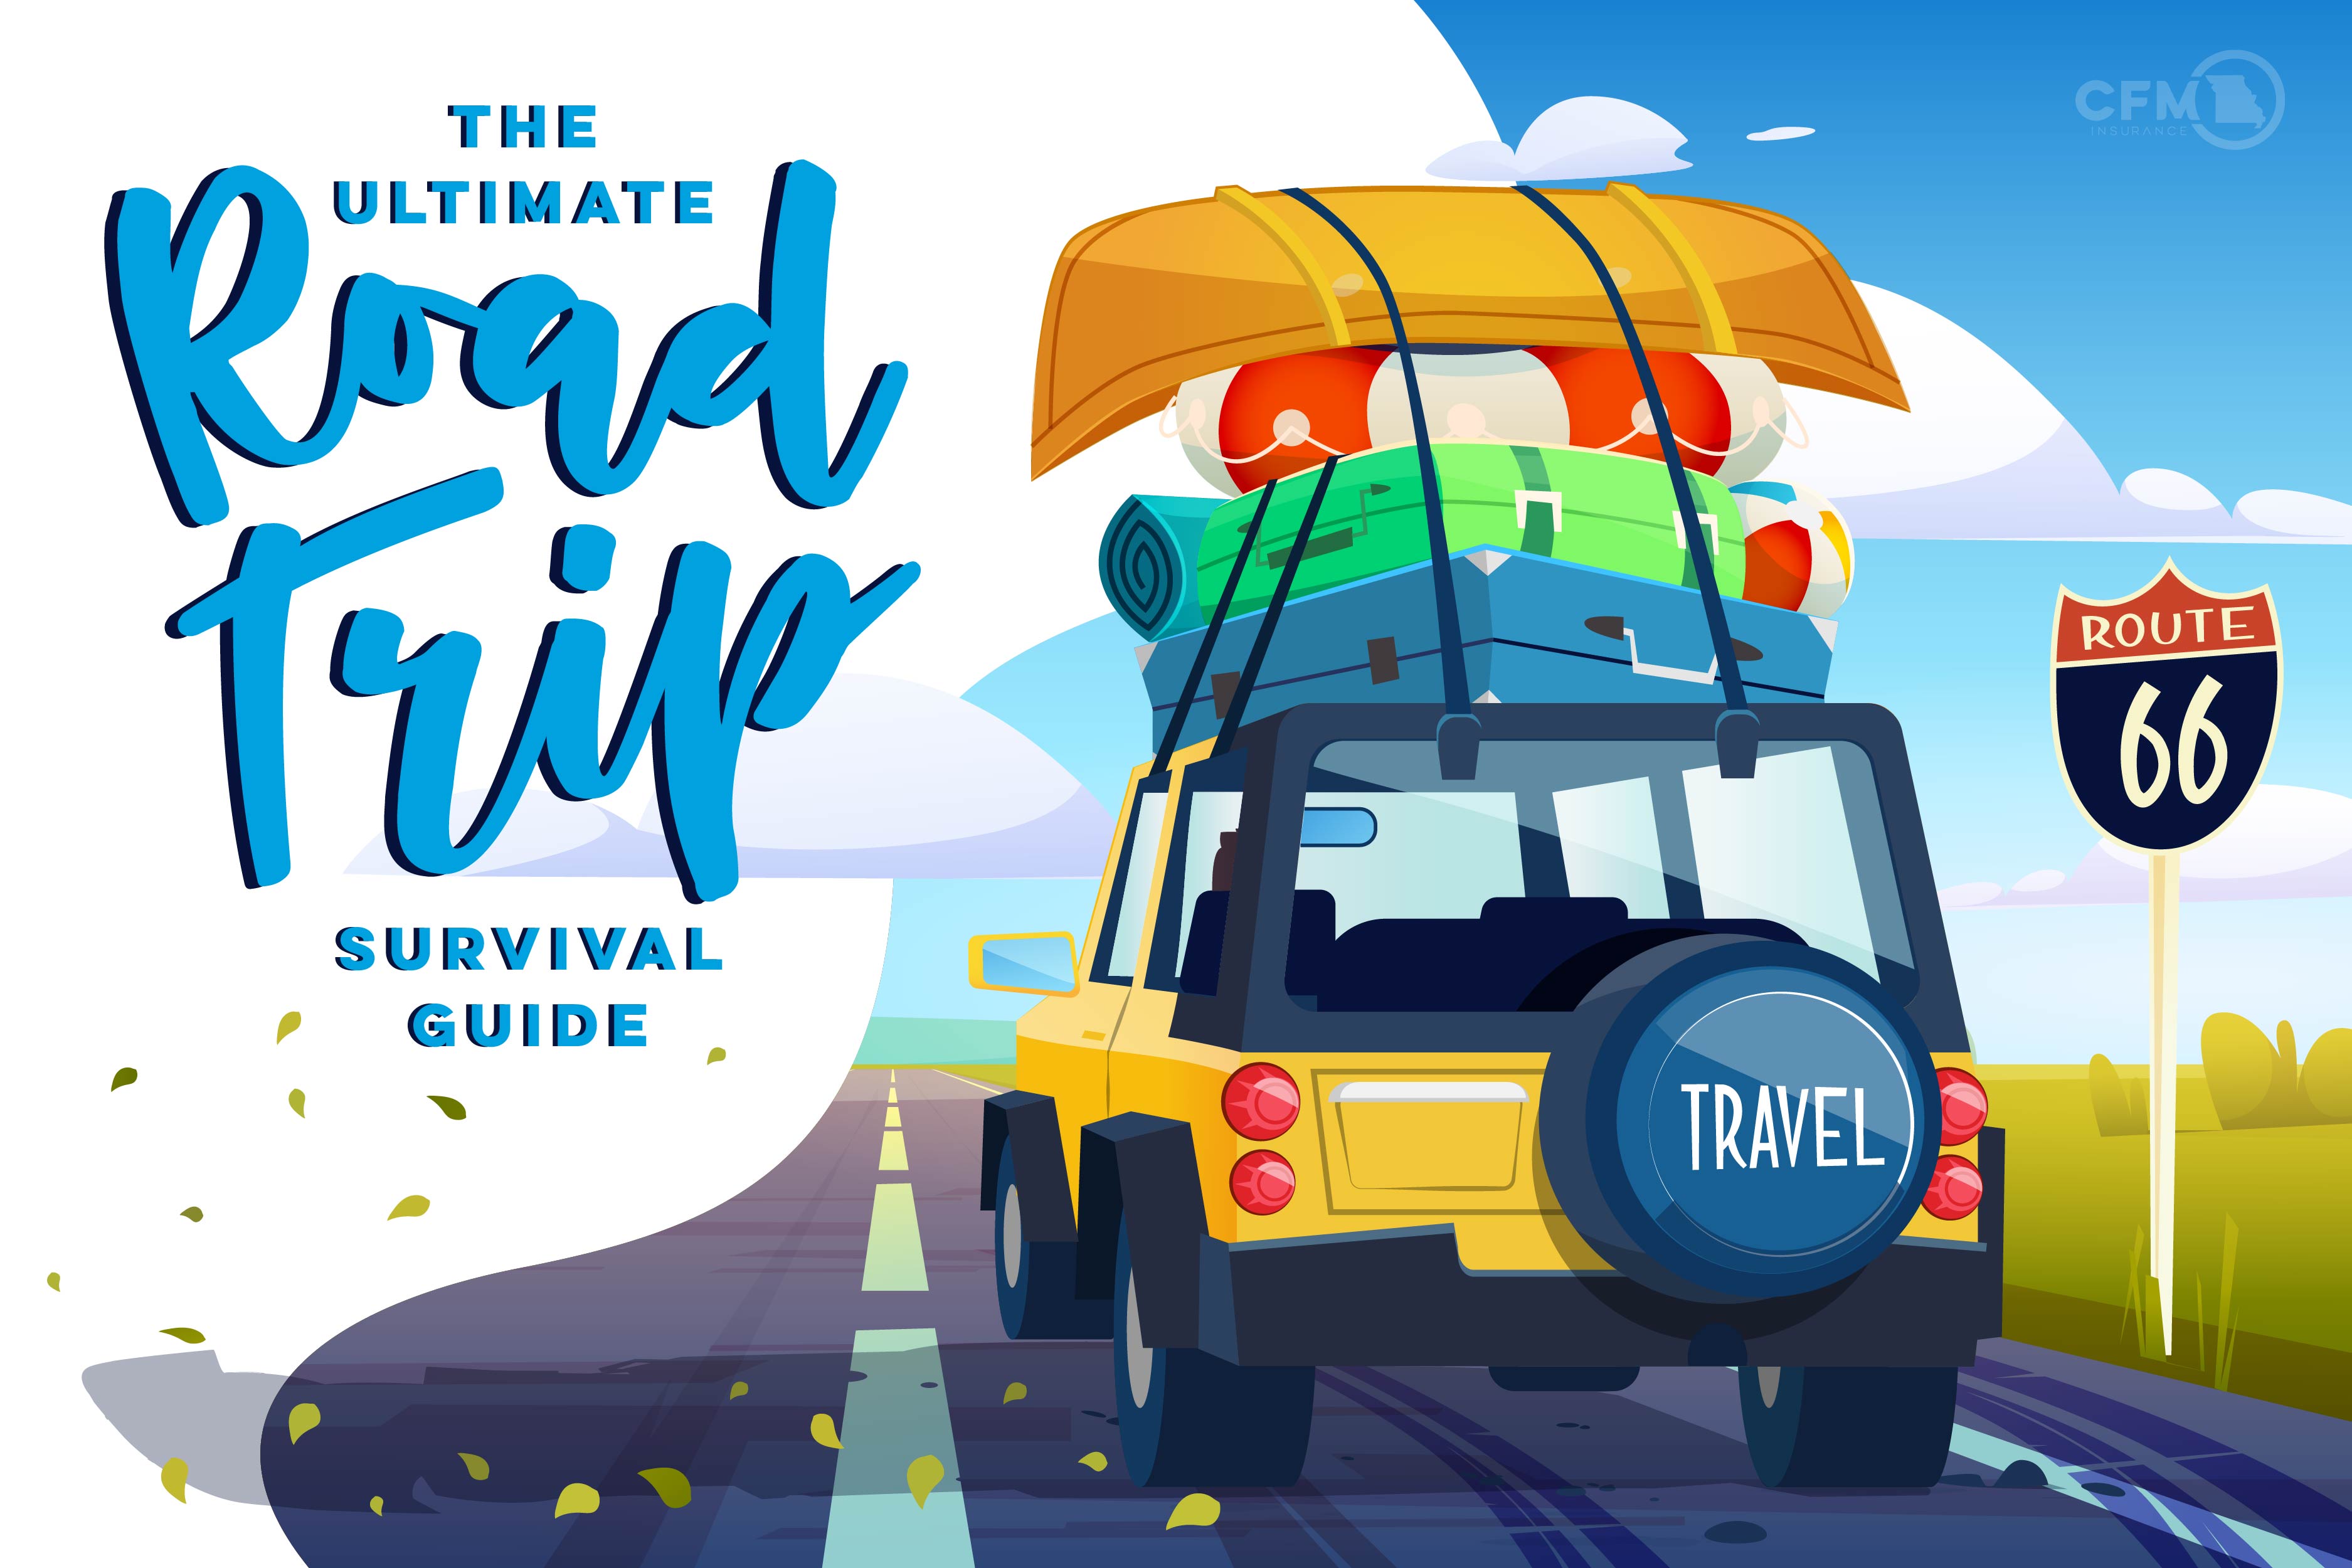 The Ultimate Road Trip Survival Guide: How To Prepare For A Memorable Summer Vacay From Behind The Wheel